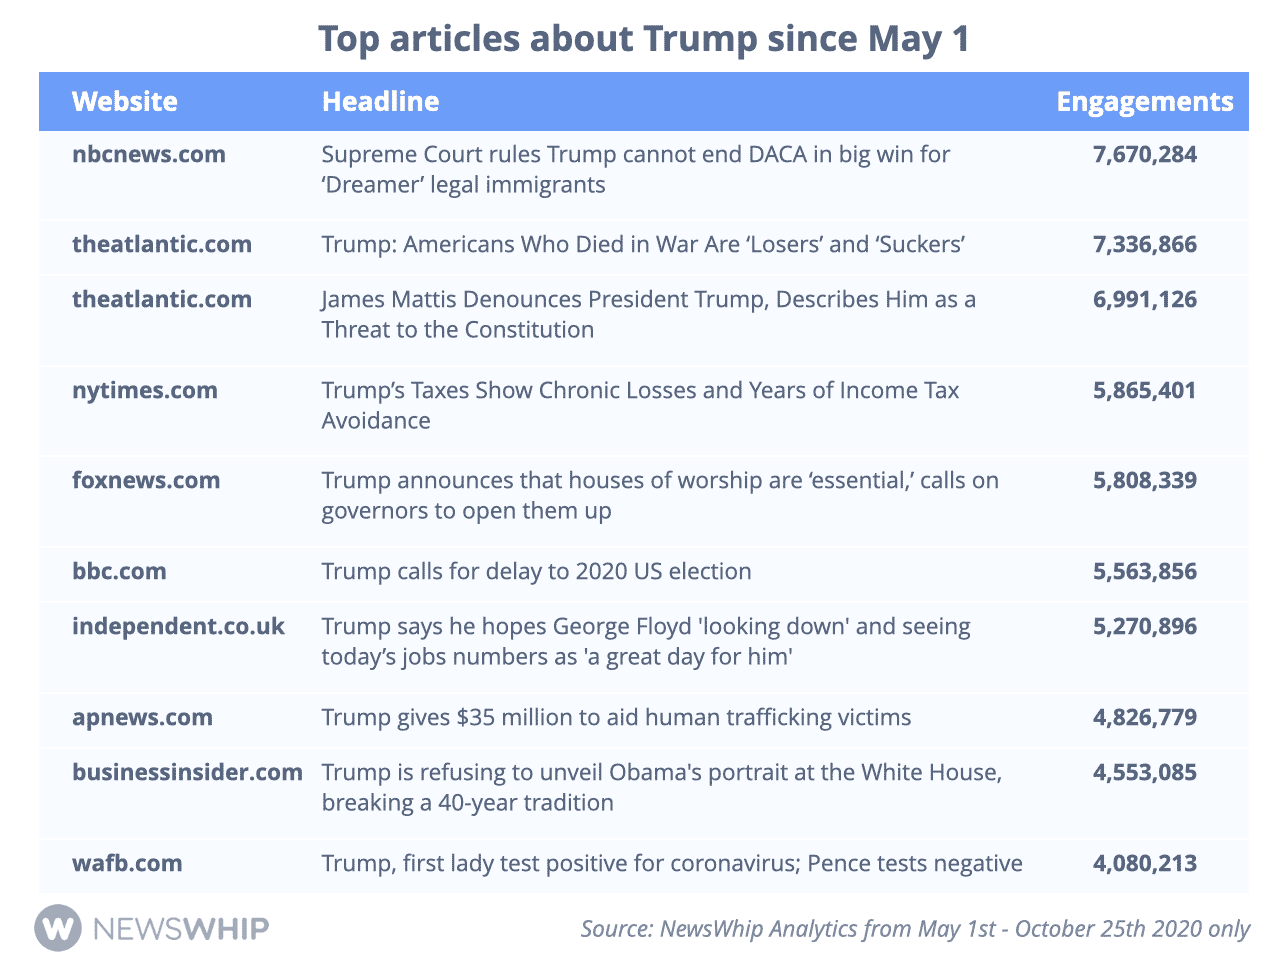 Chart showing the most engaged stories about President Trump in2020, ranked by engagement